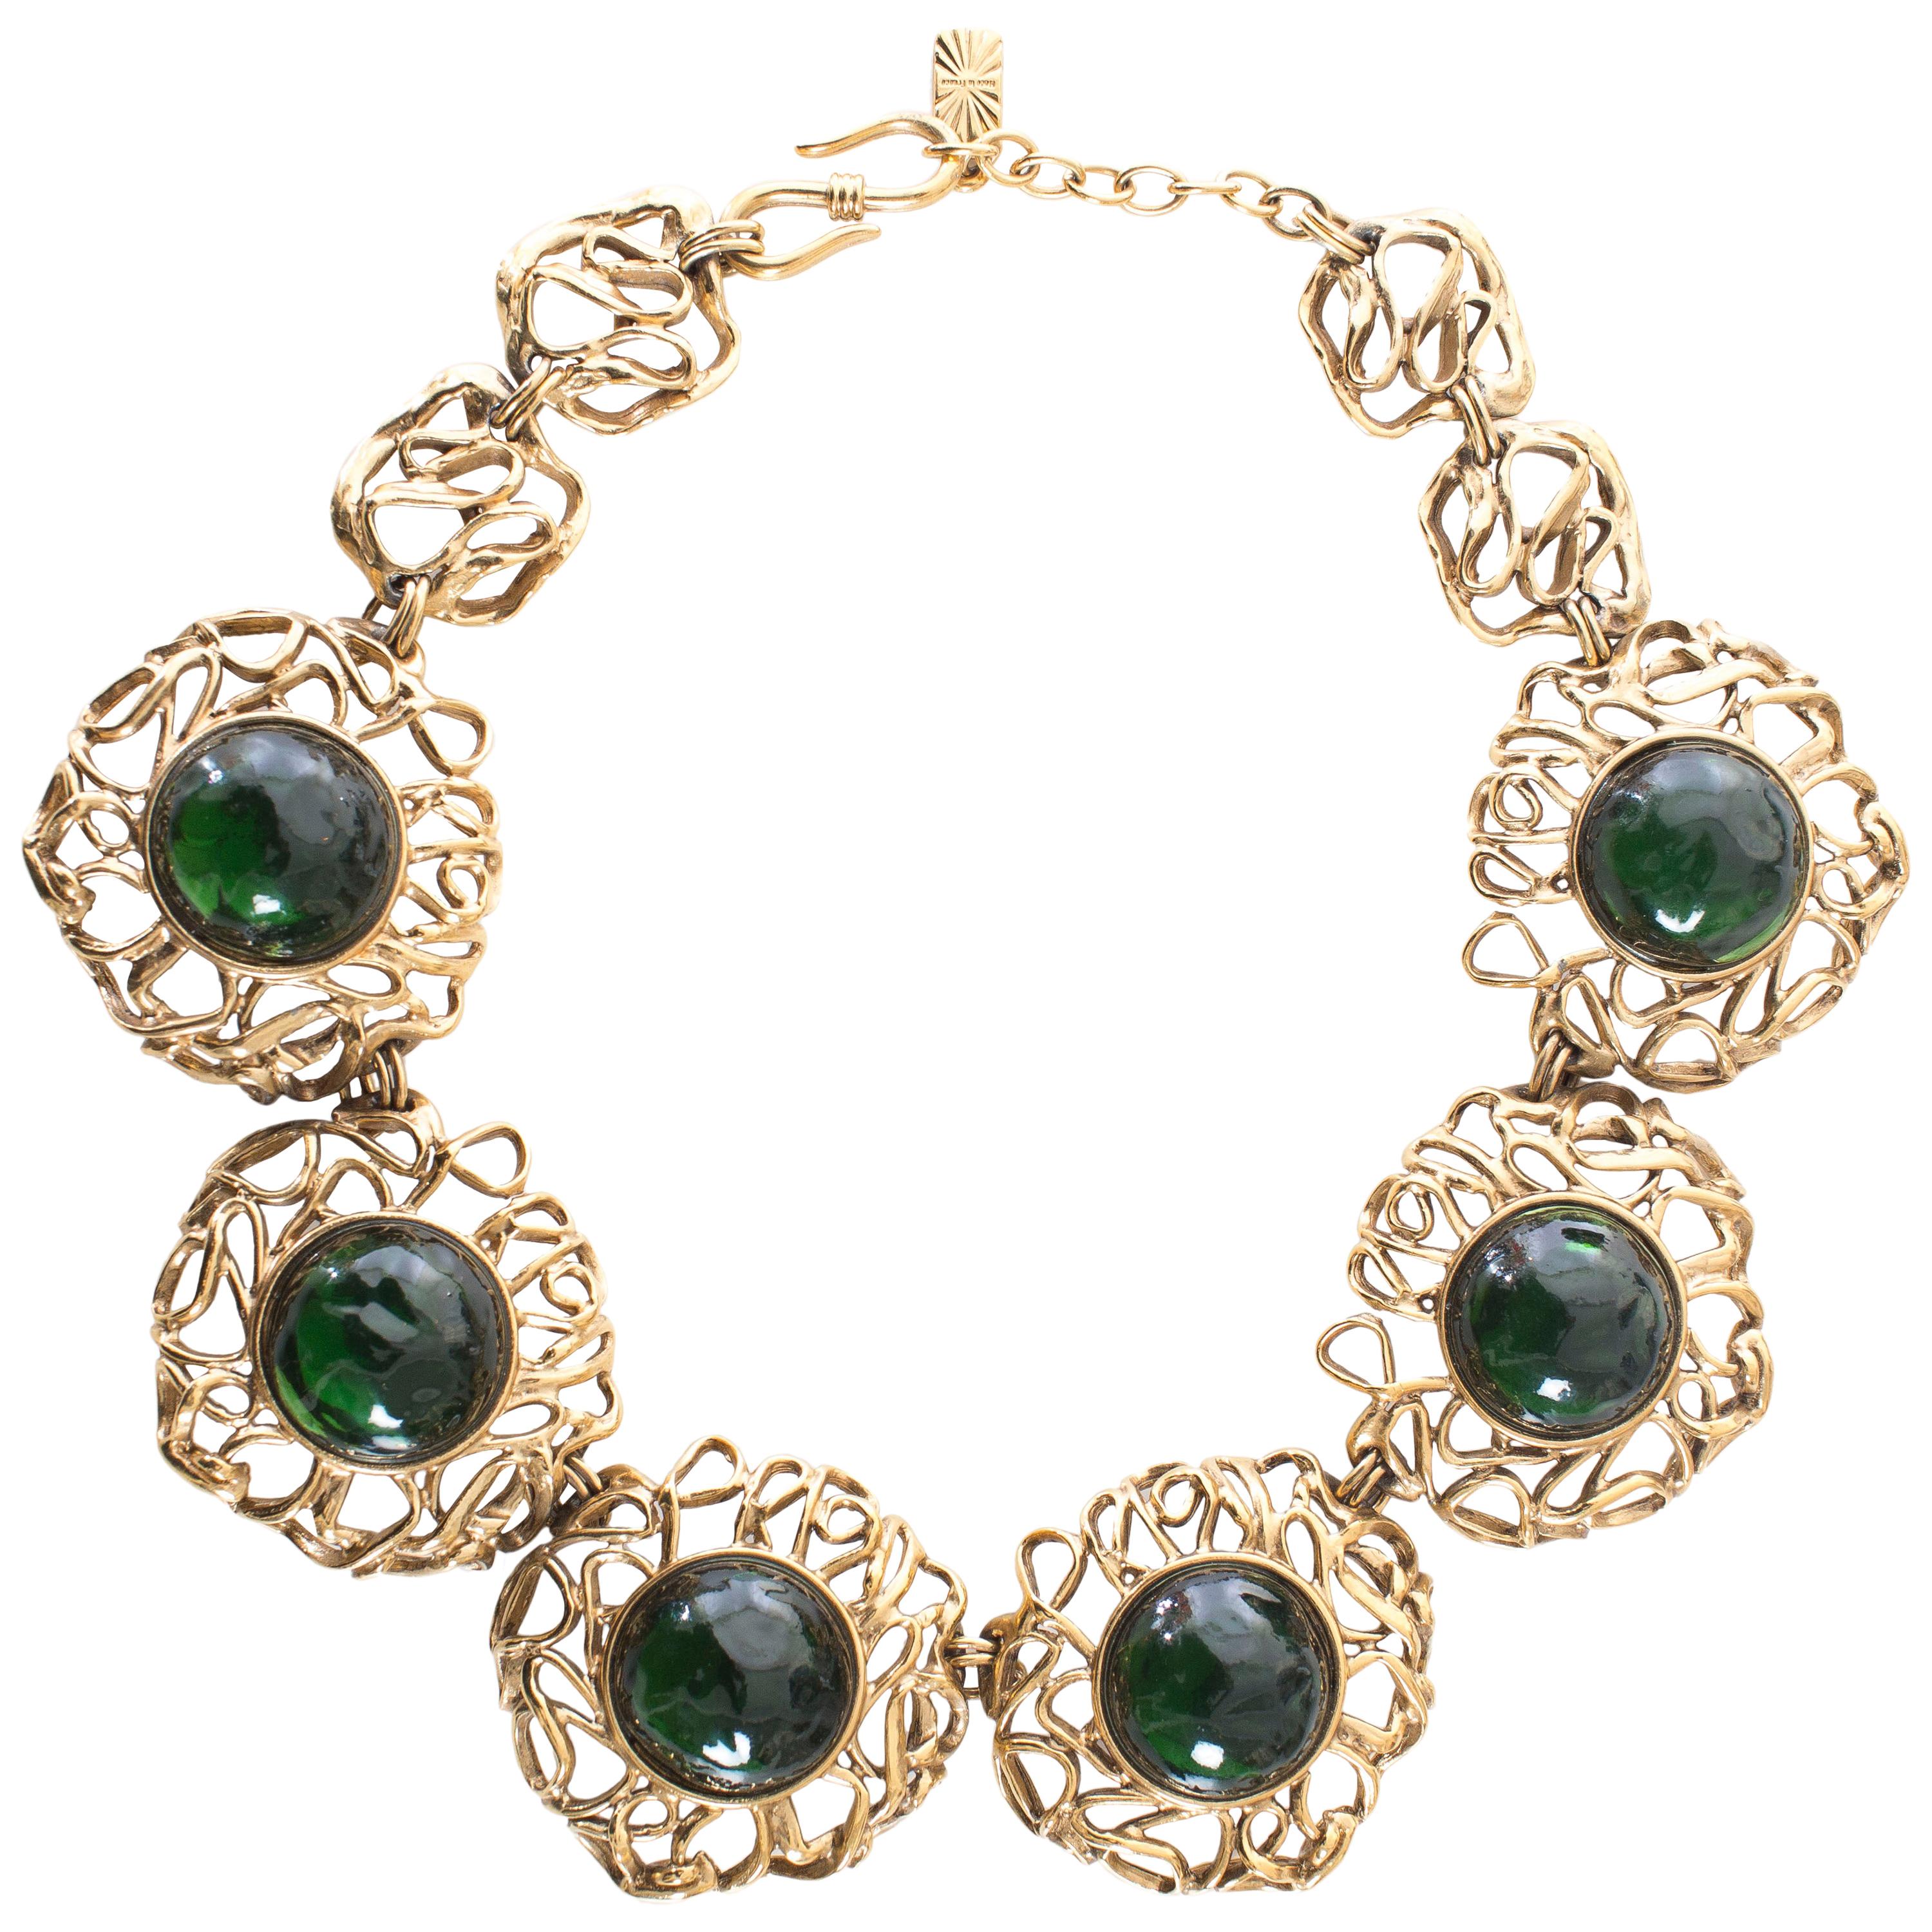 Yves Saint Laurent Gilt Metal & Green Glass Cabochon Necklace, Circa: 1980s For Sale